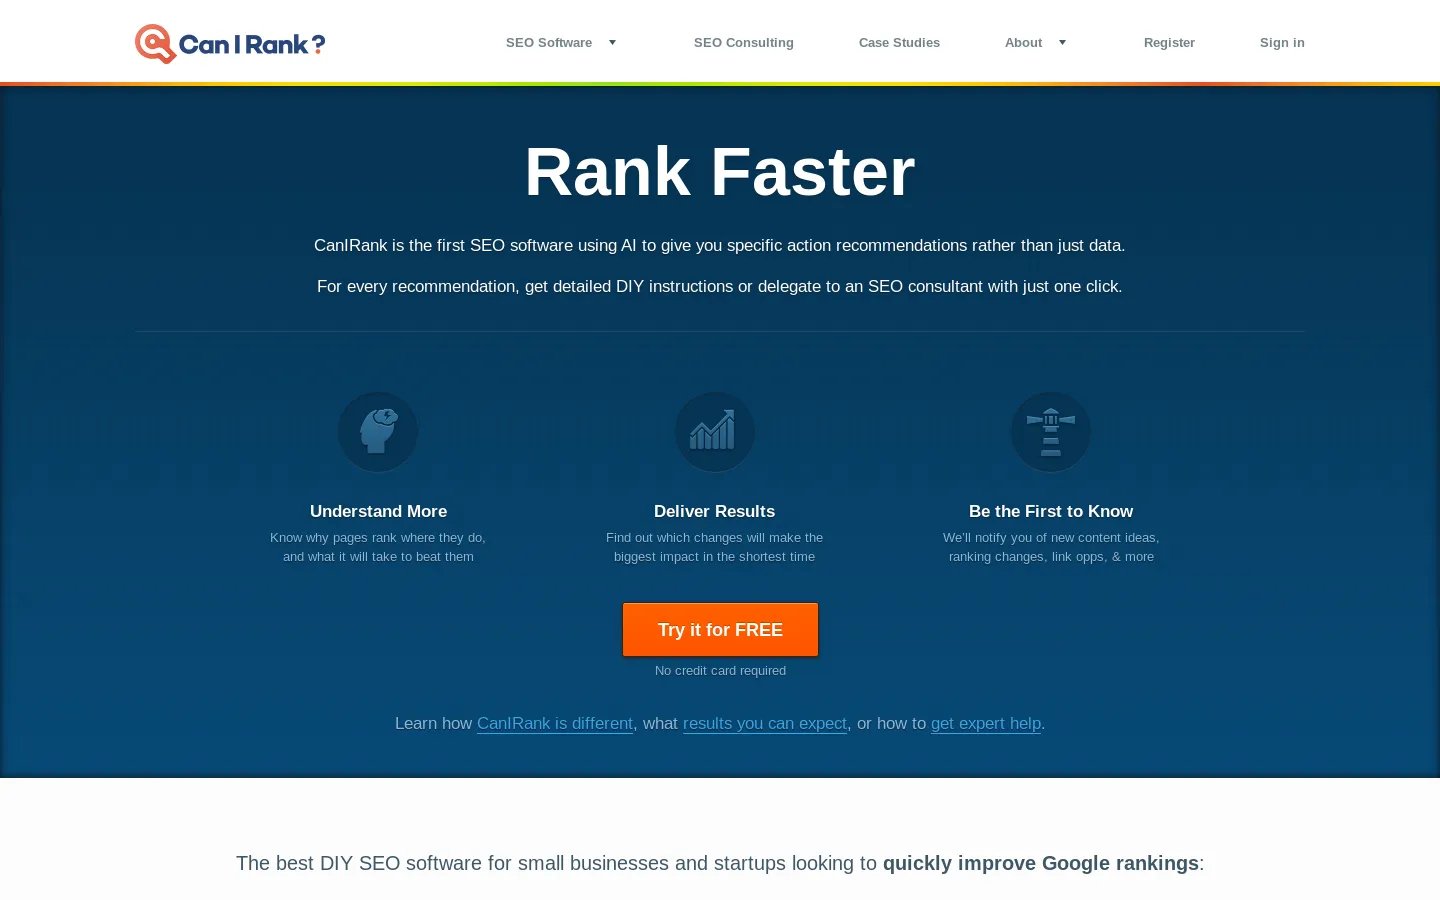 Boost Your Small Business with CanIRank's SEO Software